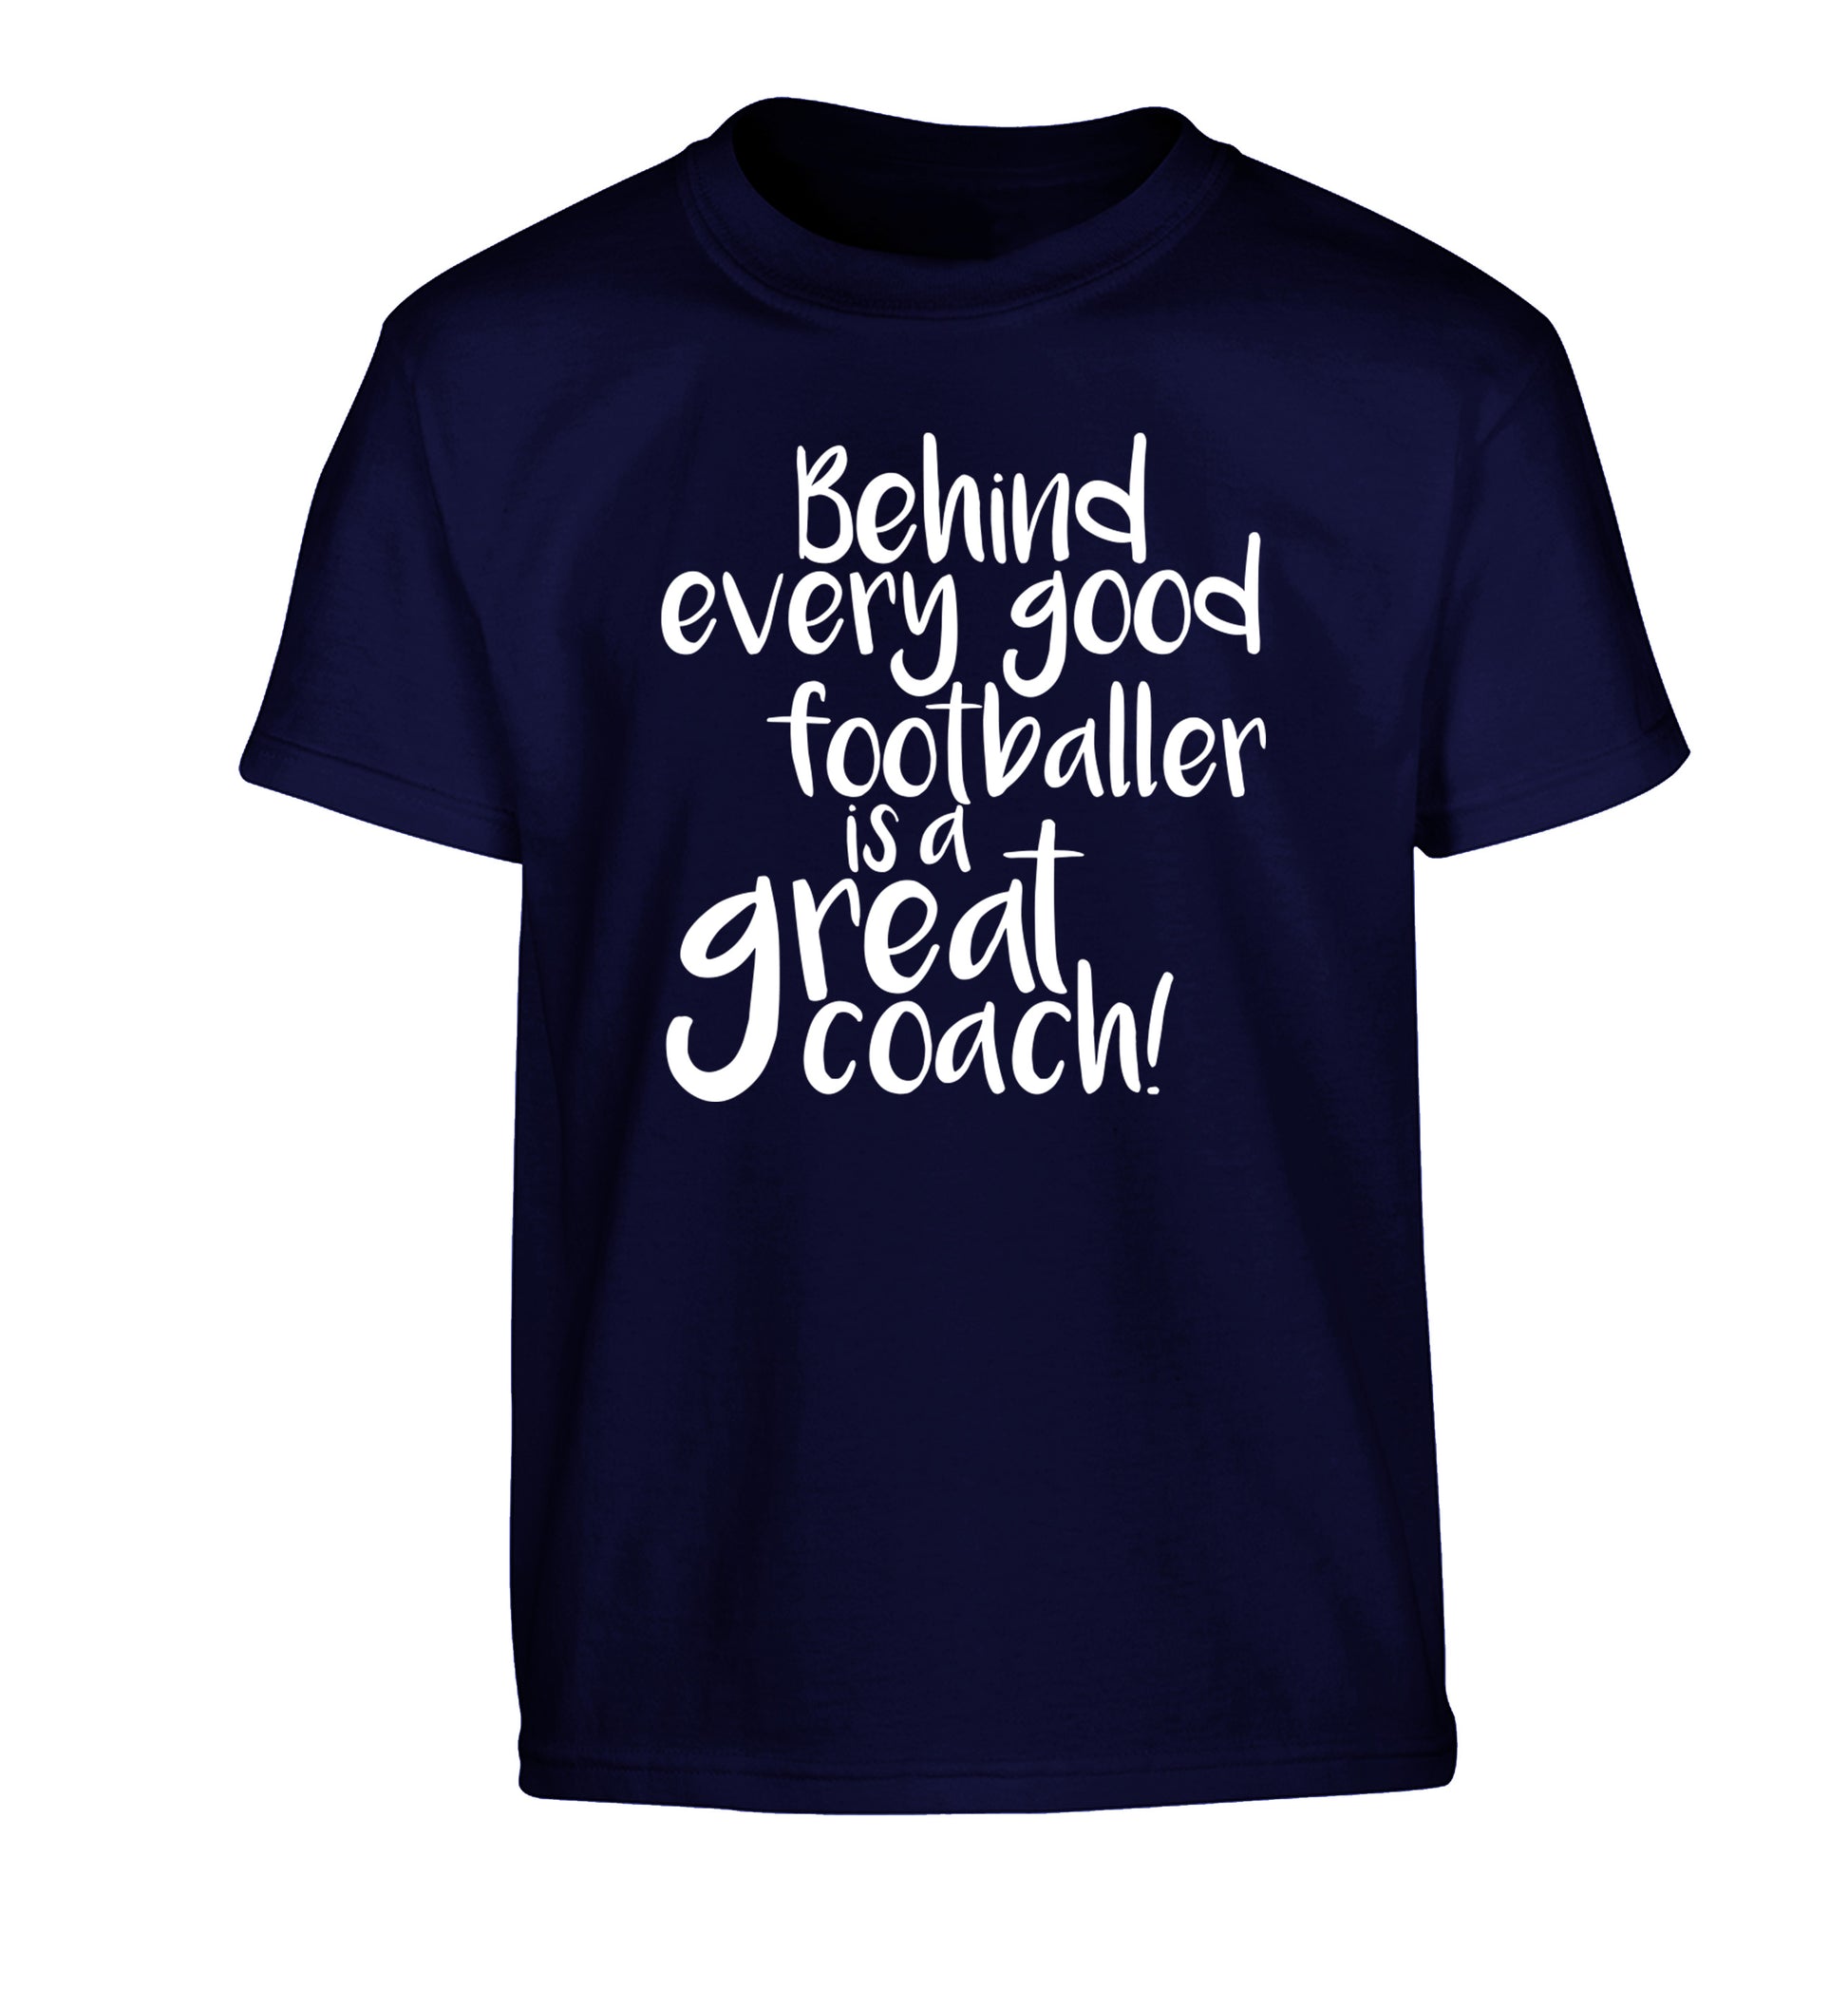 Behind every good footballer is a great coach! Children's navy Tshirt 12-14 Years